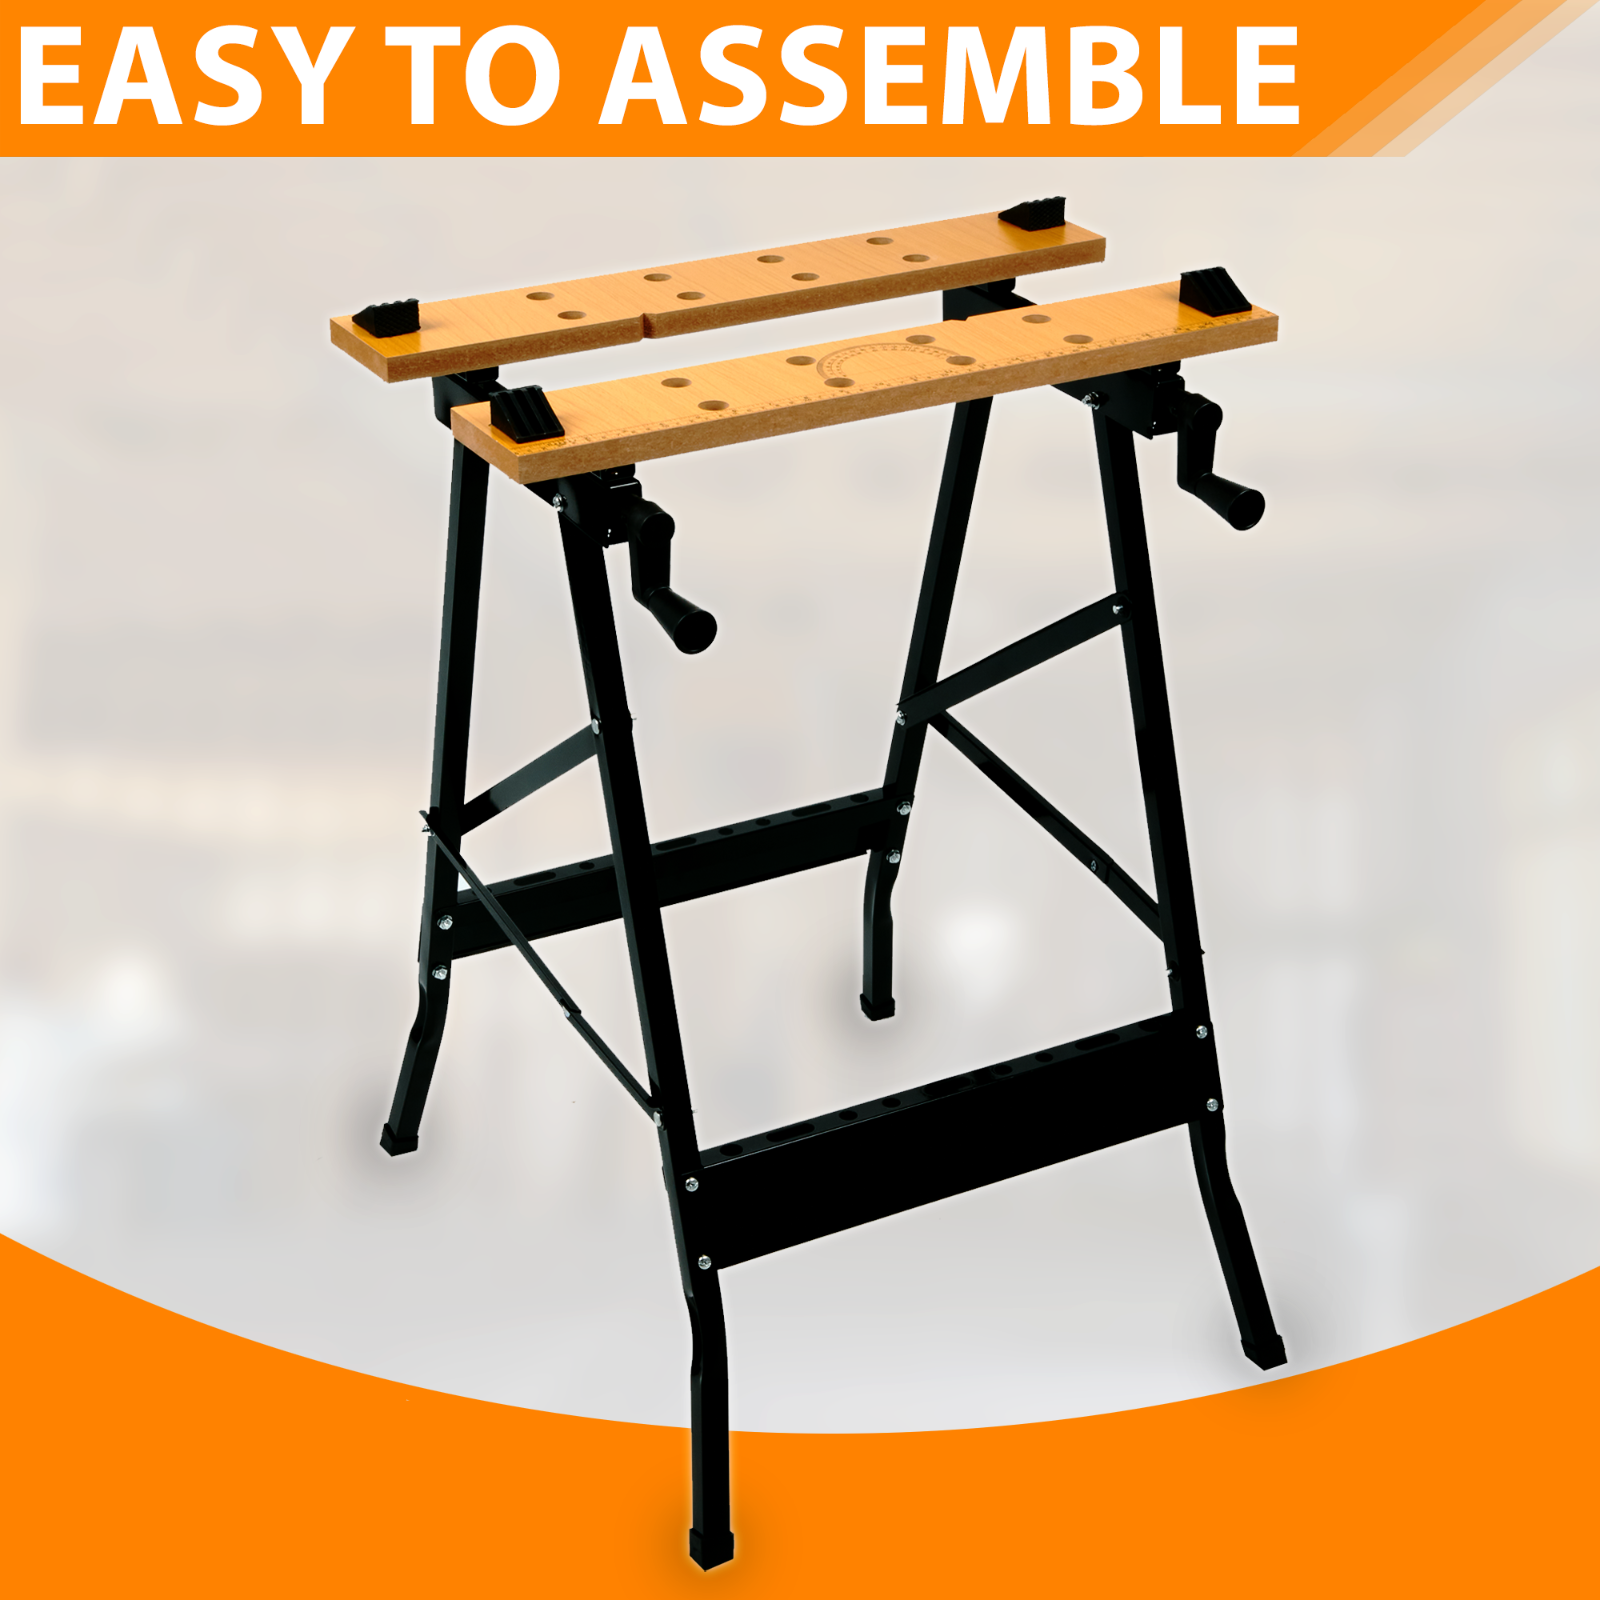 FOLDABLE WOODEN WORKBENCH BENCH WORK PORTABLE CLAMPING FOLDING WORKTOP TABLE DIY